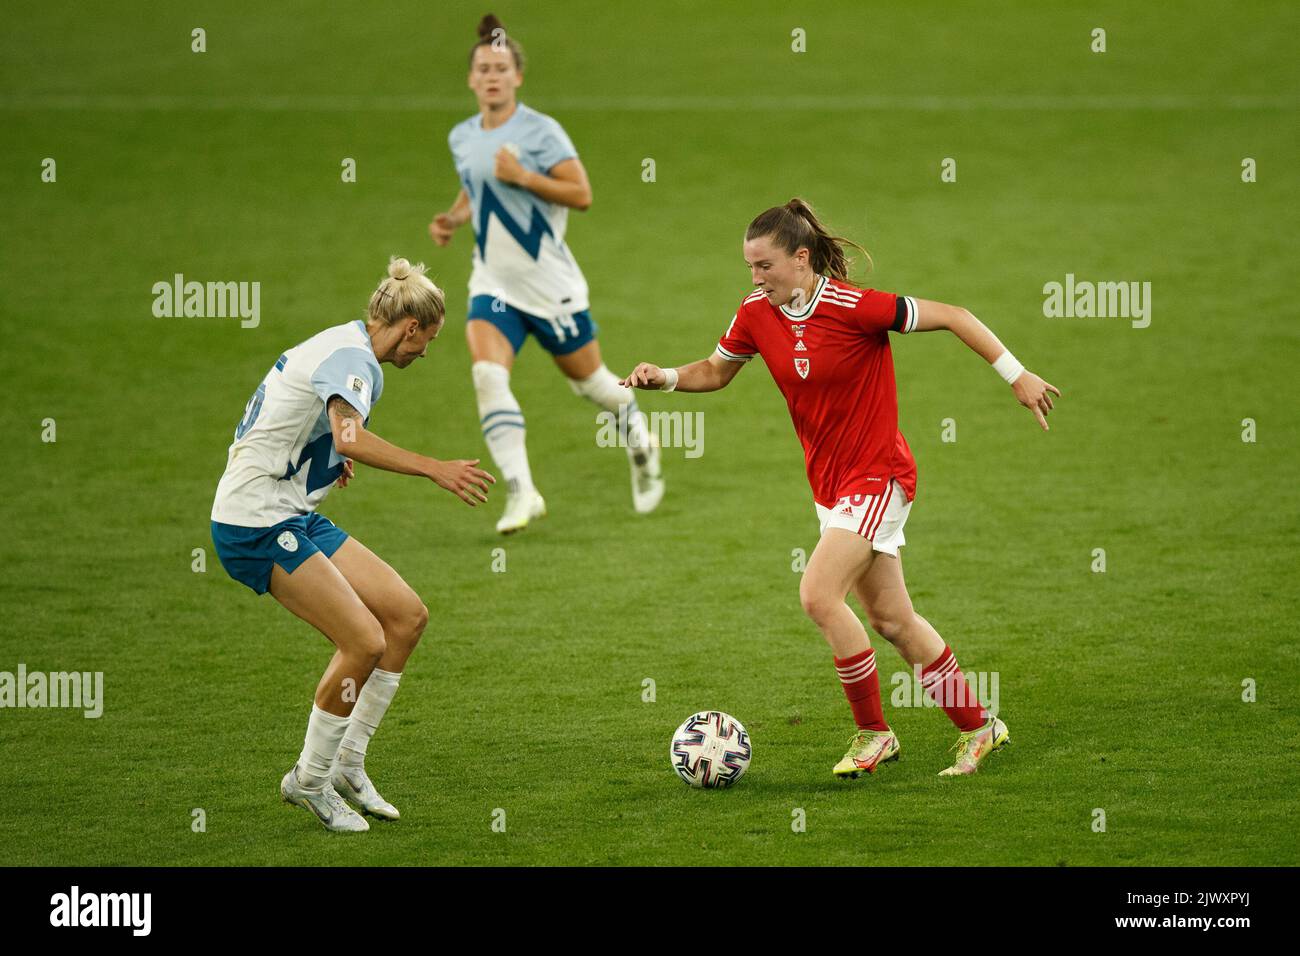 Cardiff, UK. 6th Sep, 2022. Carrie Jones of Wales during the Wales v Slovenia Women's World Cup Qualification match. Credit: Gruffydd Thomas/Alamy Live News Stock Photo